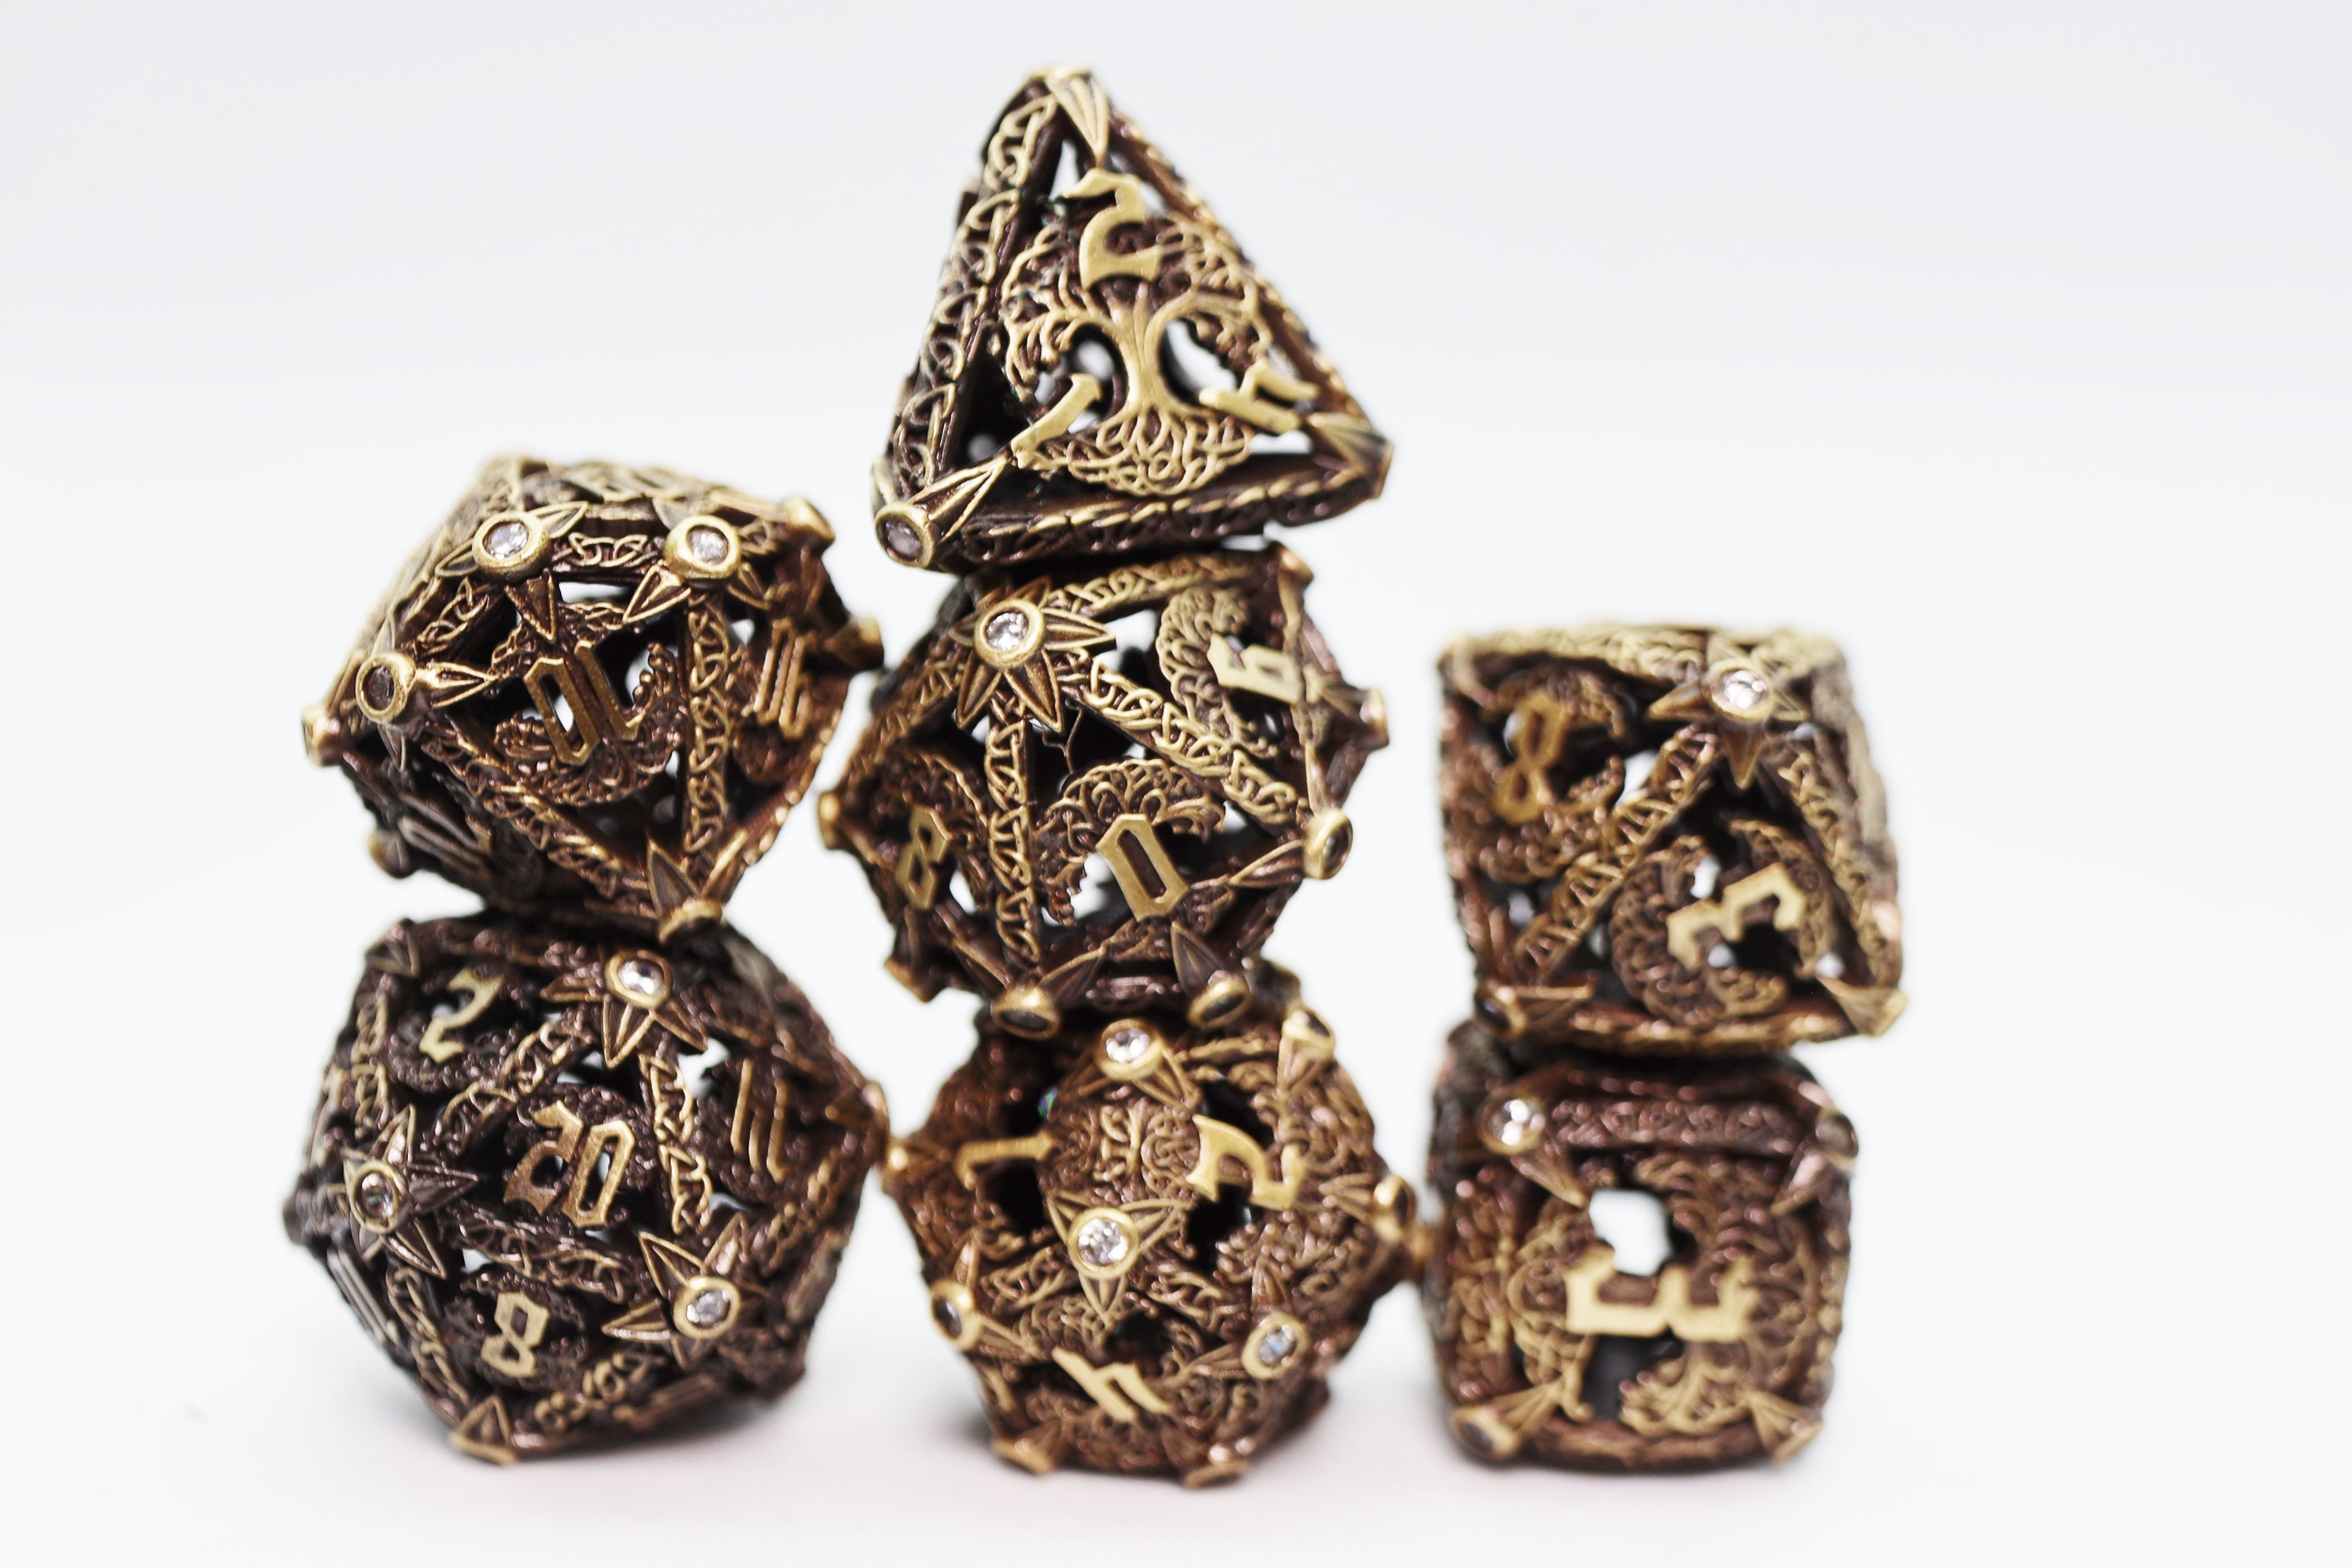 Trees of Virtue: Tree of Humility - Hollow Metal RPG Dice Set - Bards & Cards